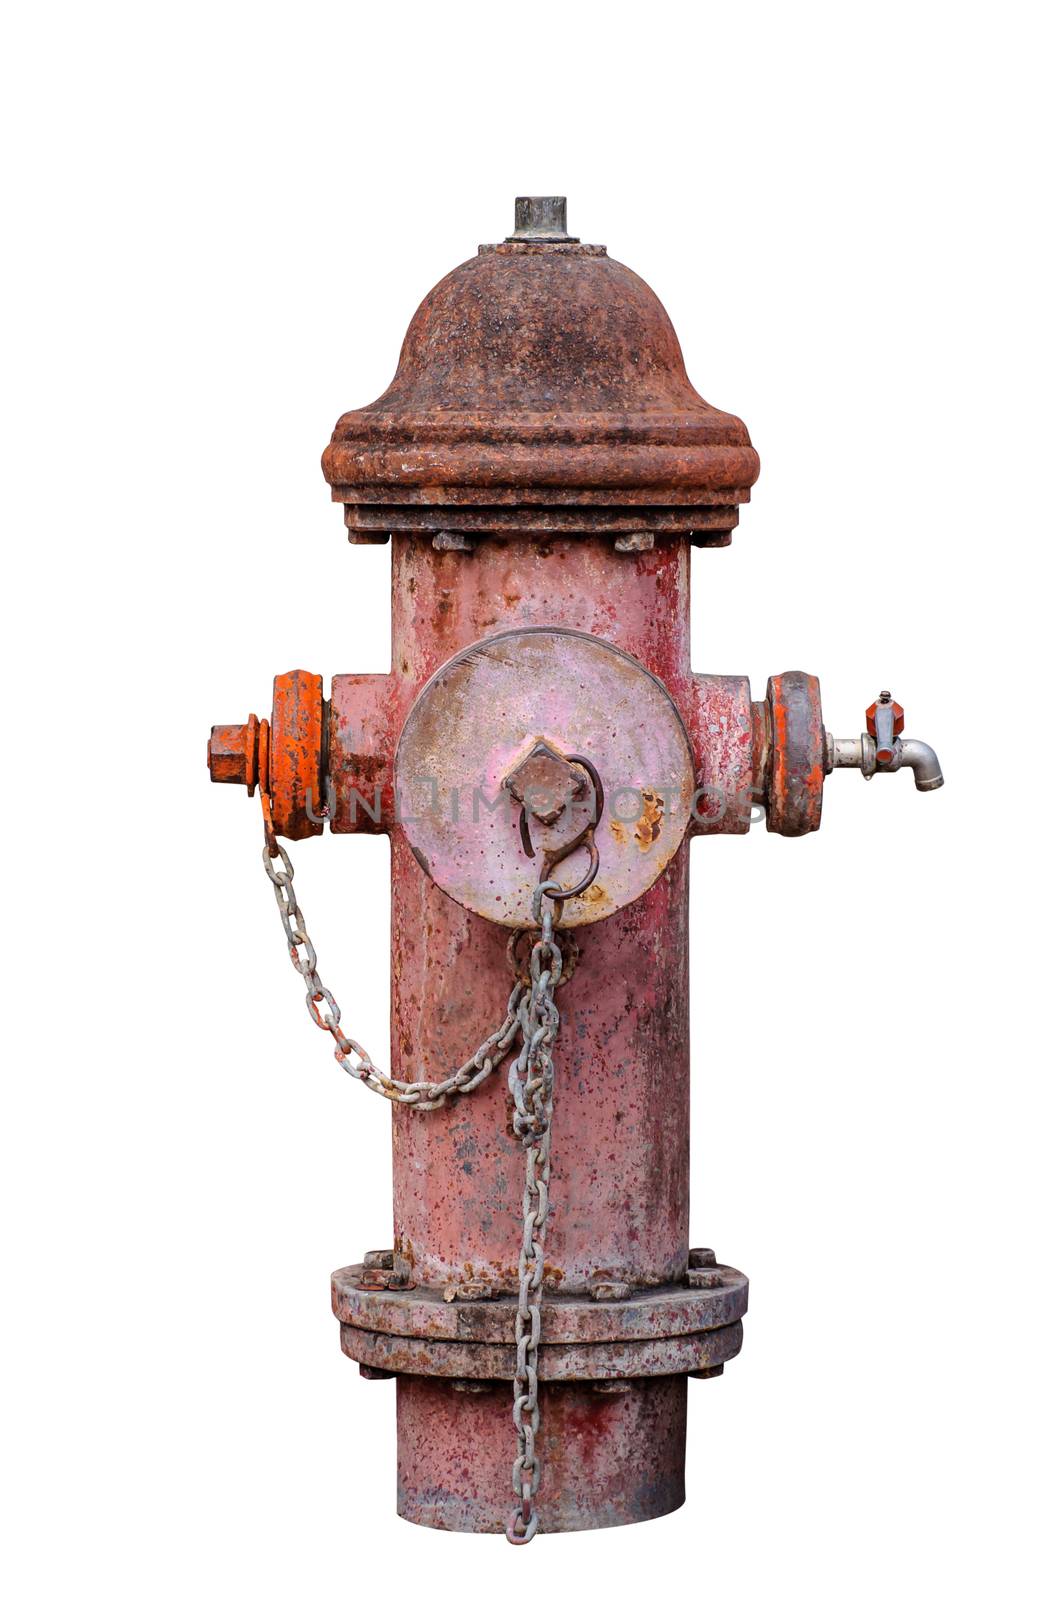 Old red fire hydrant by NuwatPhoto